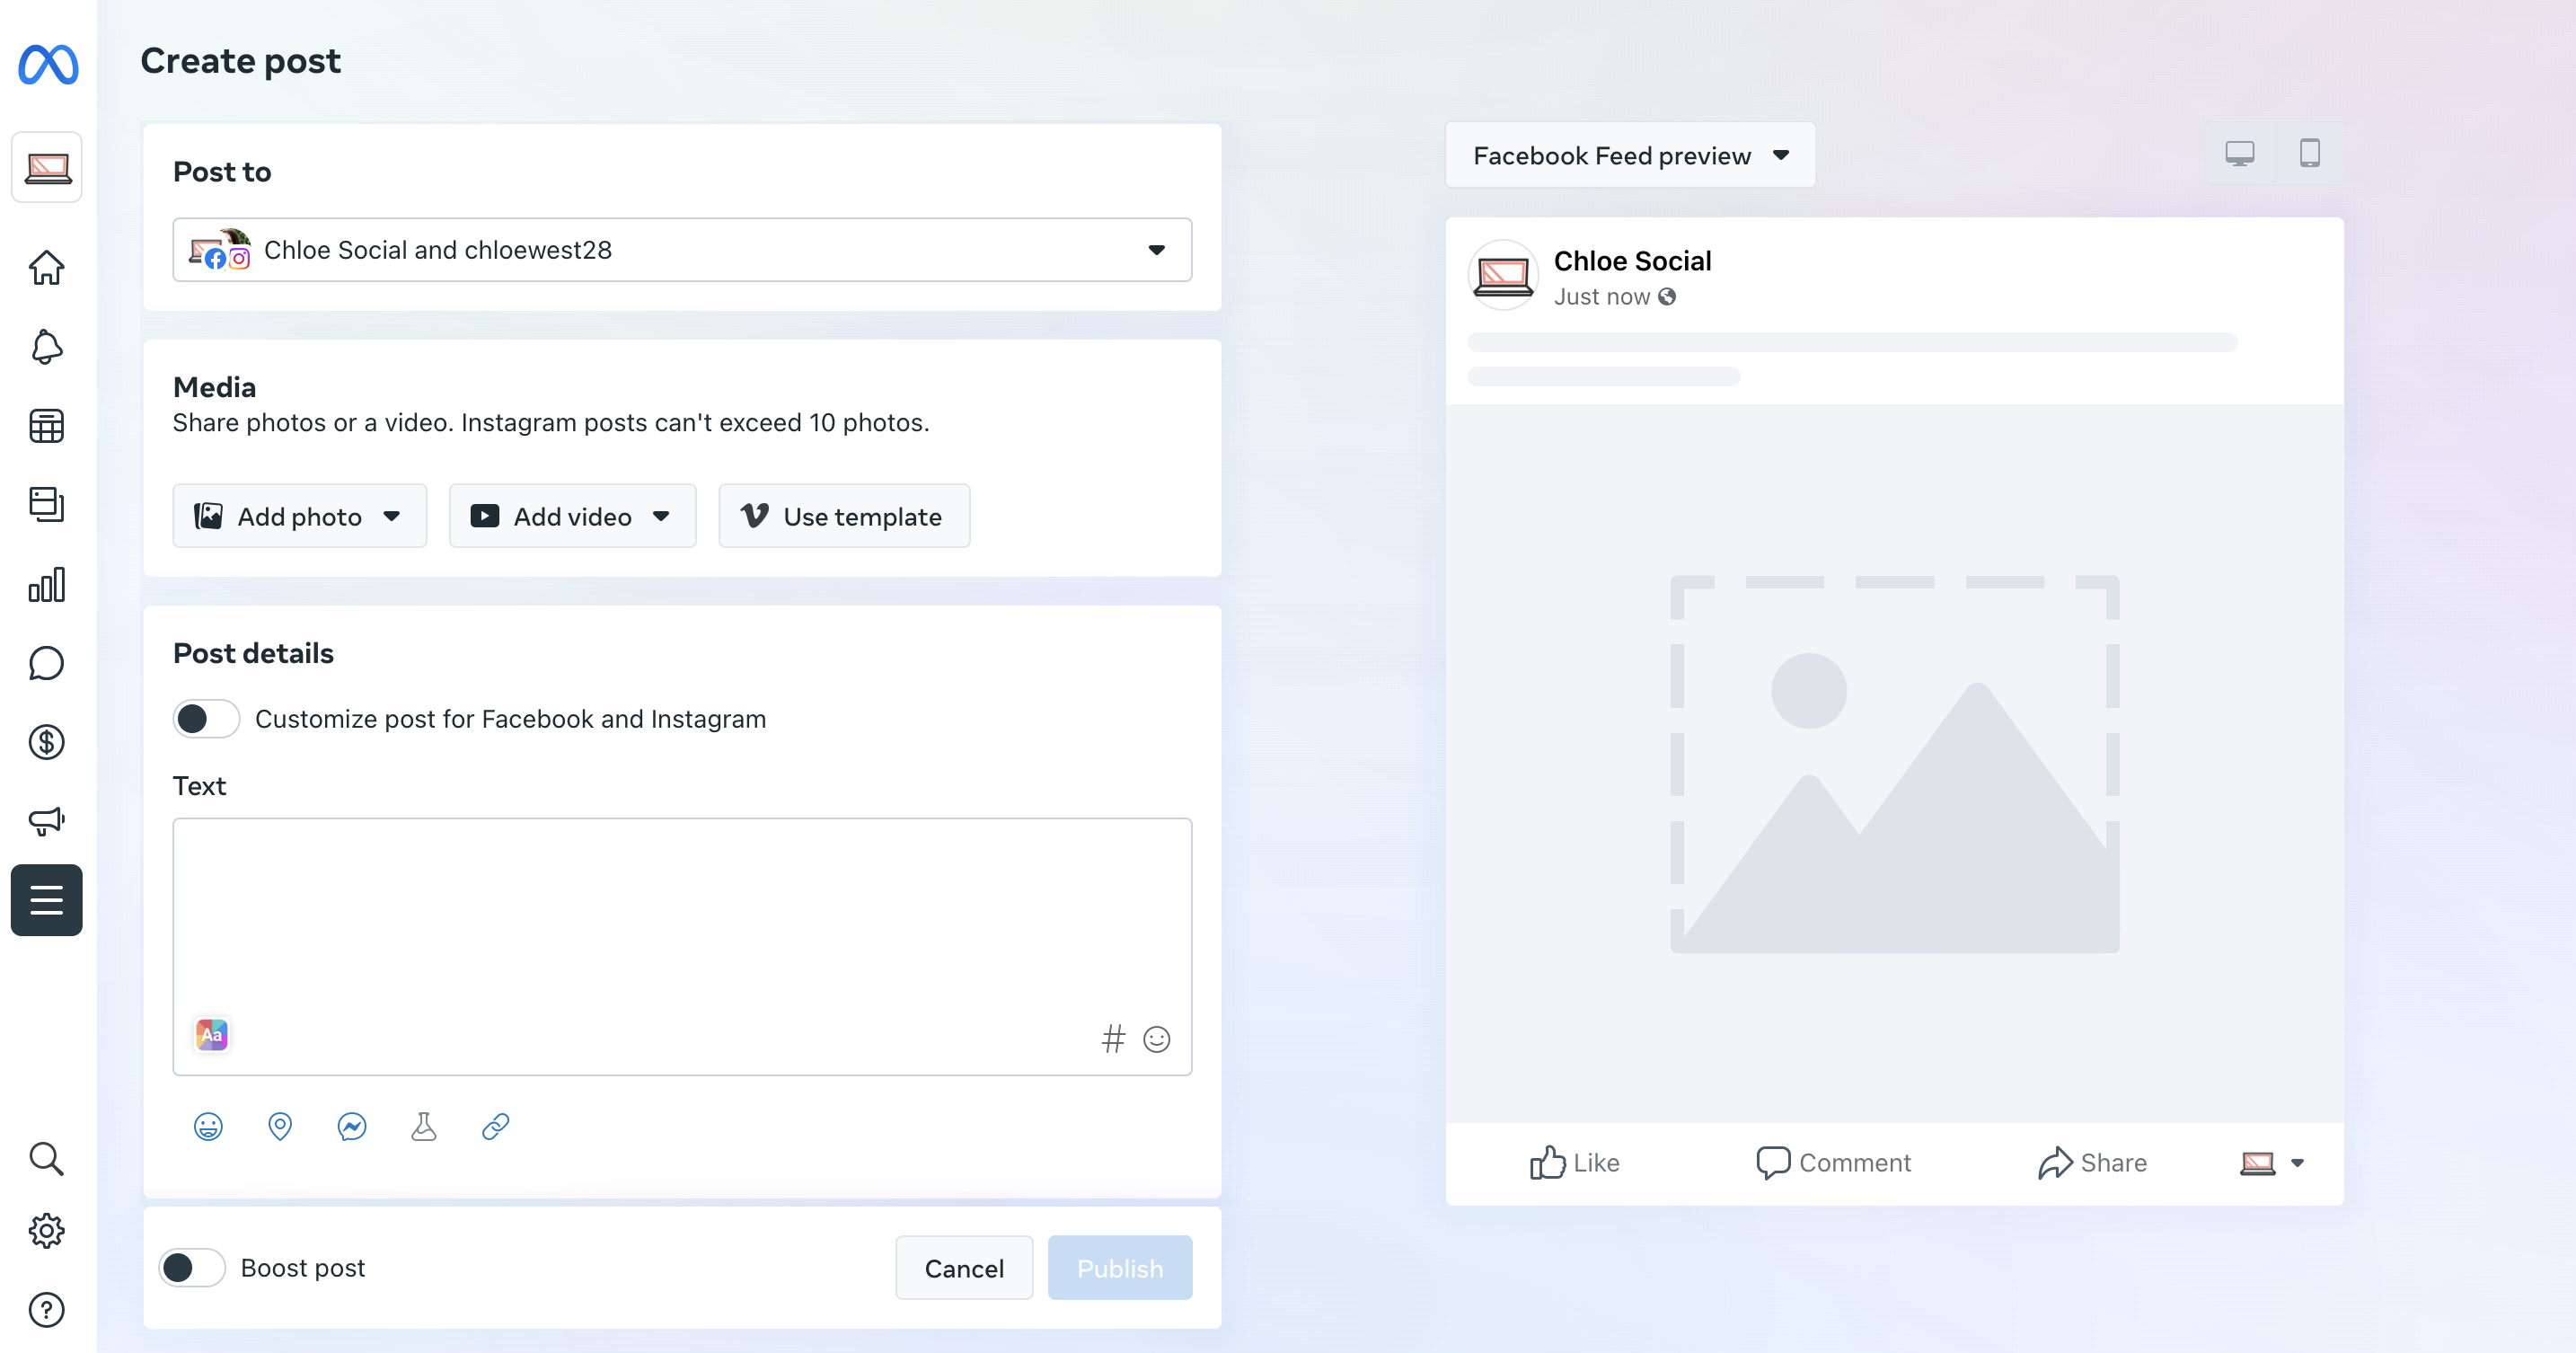 A screenshot showing the post creation screen in Meta Business Suite